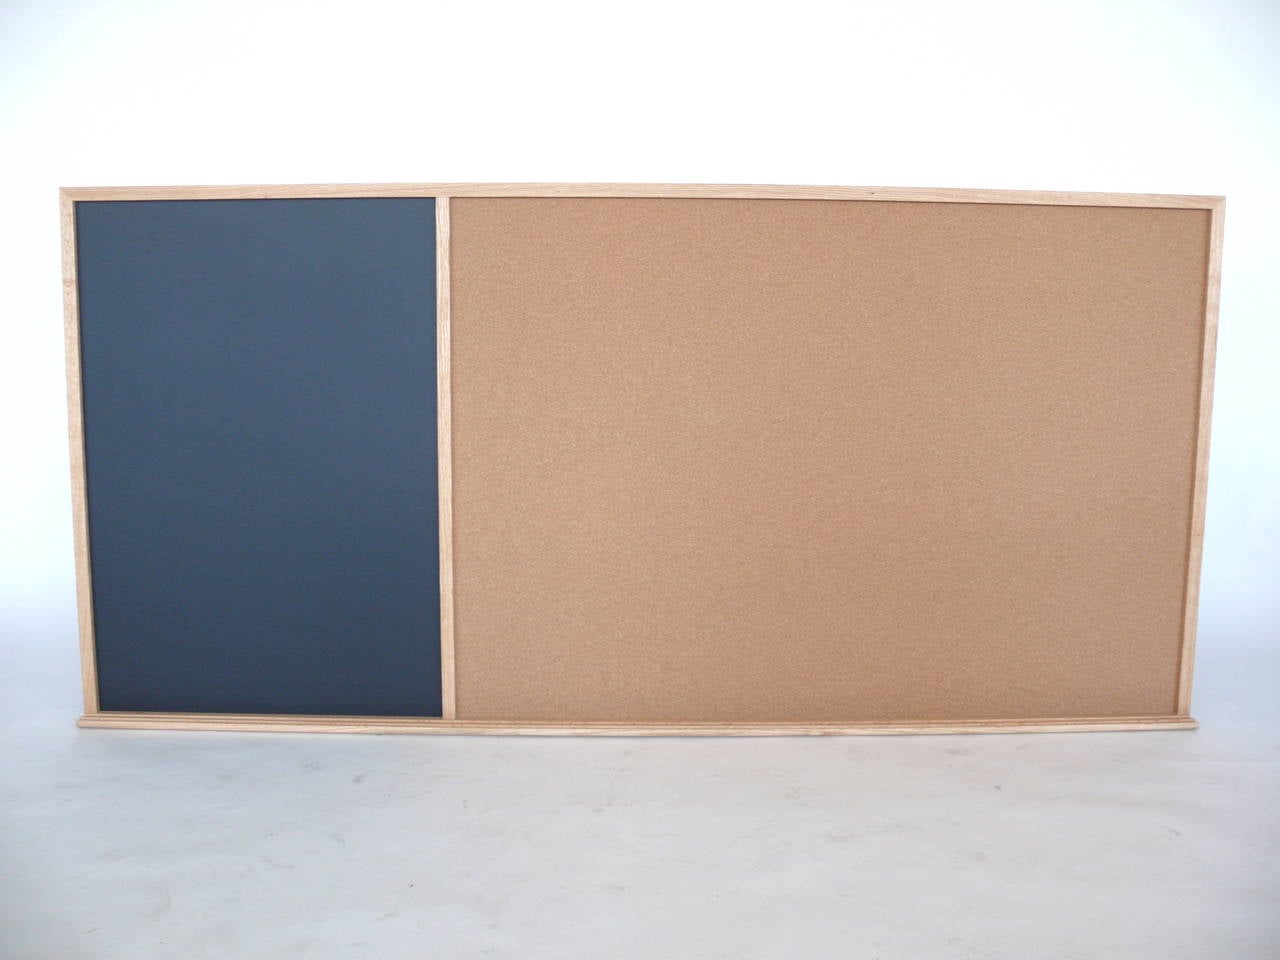 Whimsical organizational board with cork board, black magnetic chalkboard and oak frame. Bottom tray runs the length of the board. Magnetic chalkboard section is 28